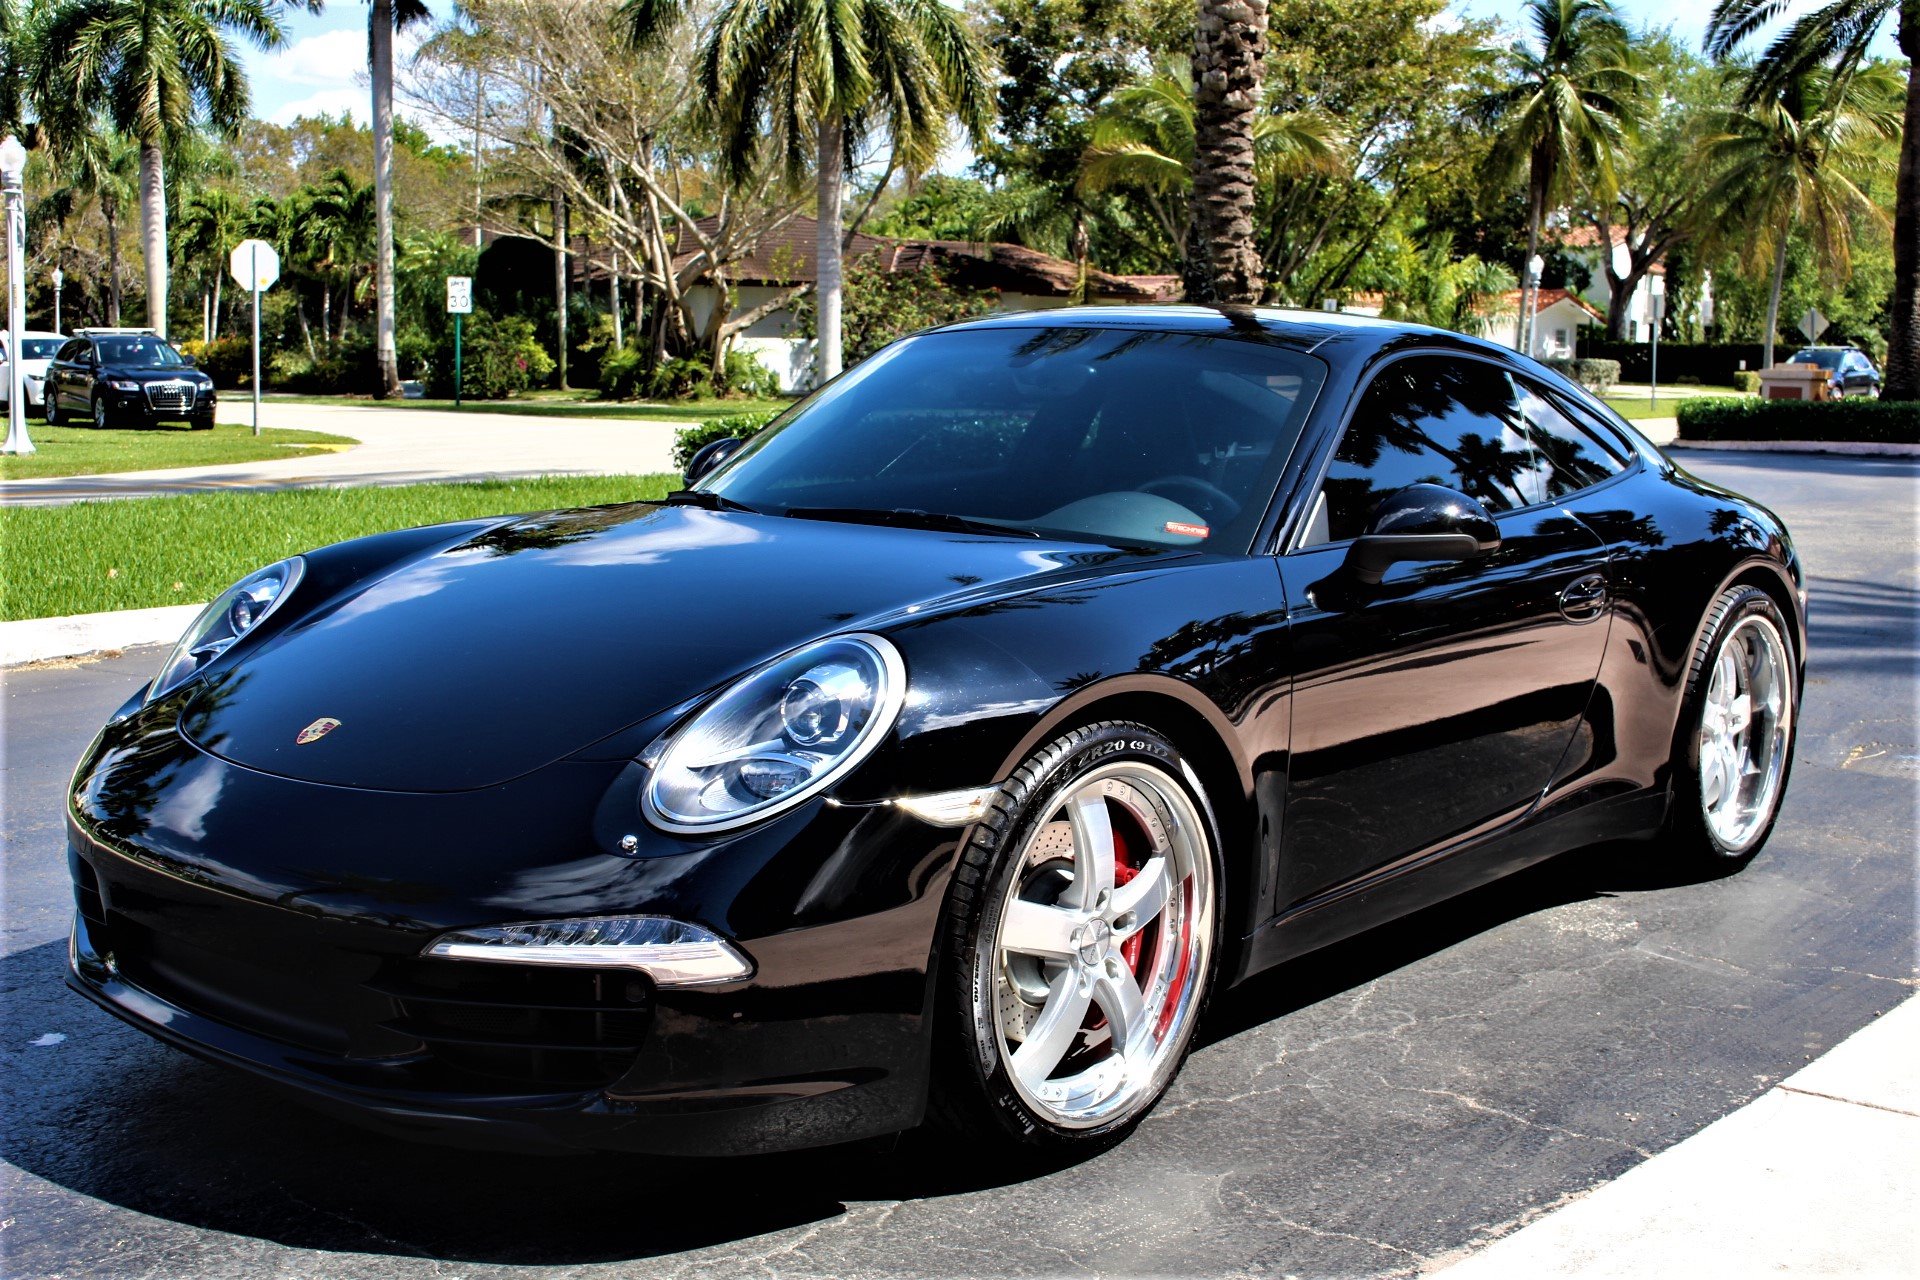 Used 2012 Porsche 911 Carrera S for sale Sold at The Gables Sports Cars in Miami FL 33146 4